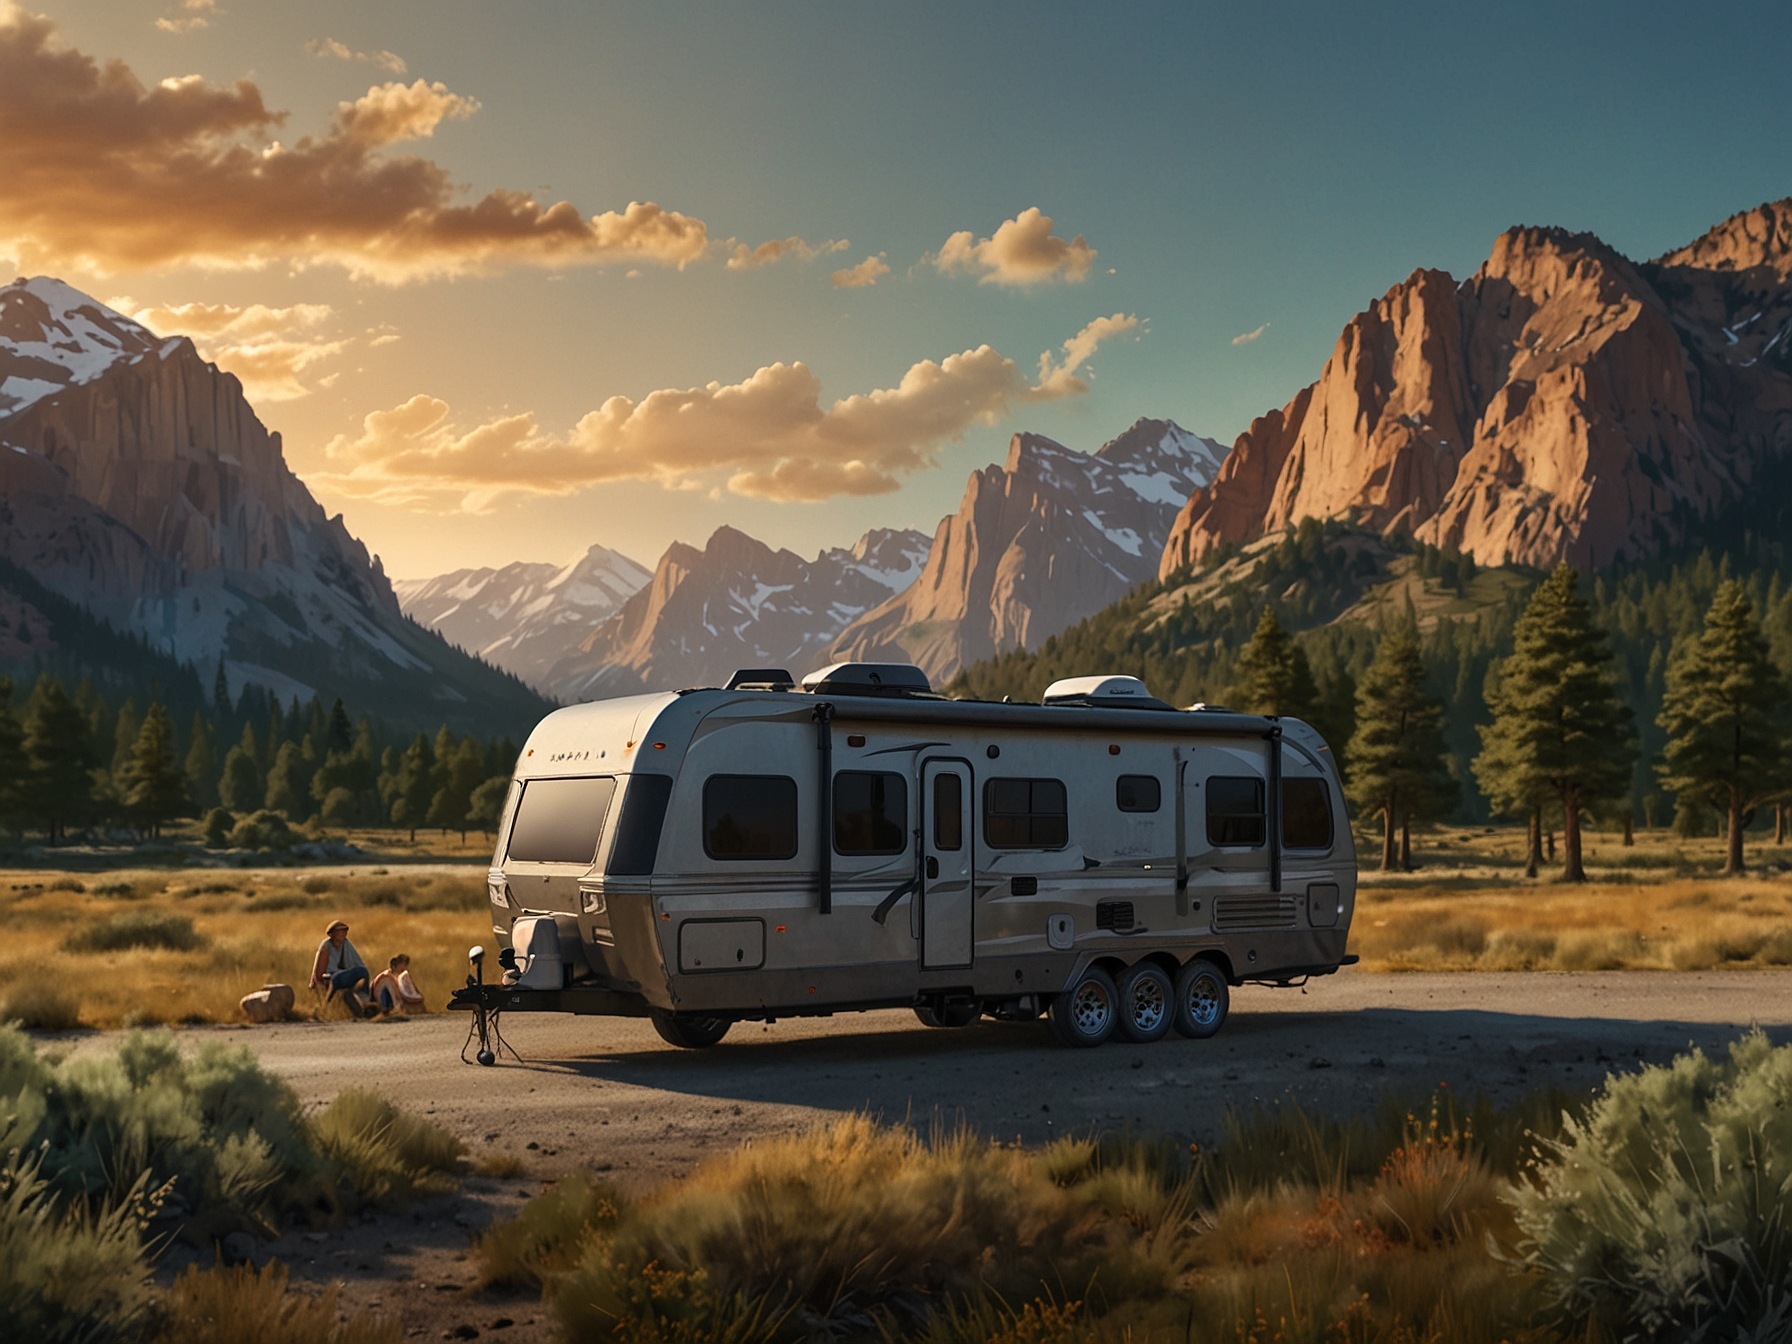 A family enjoying the scenic beauty of a national park during their RV adventure. The image captures their RV parked near a picturesque landscape, highlighting the trend of exploring nature through RV travel.